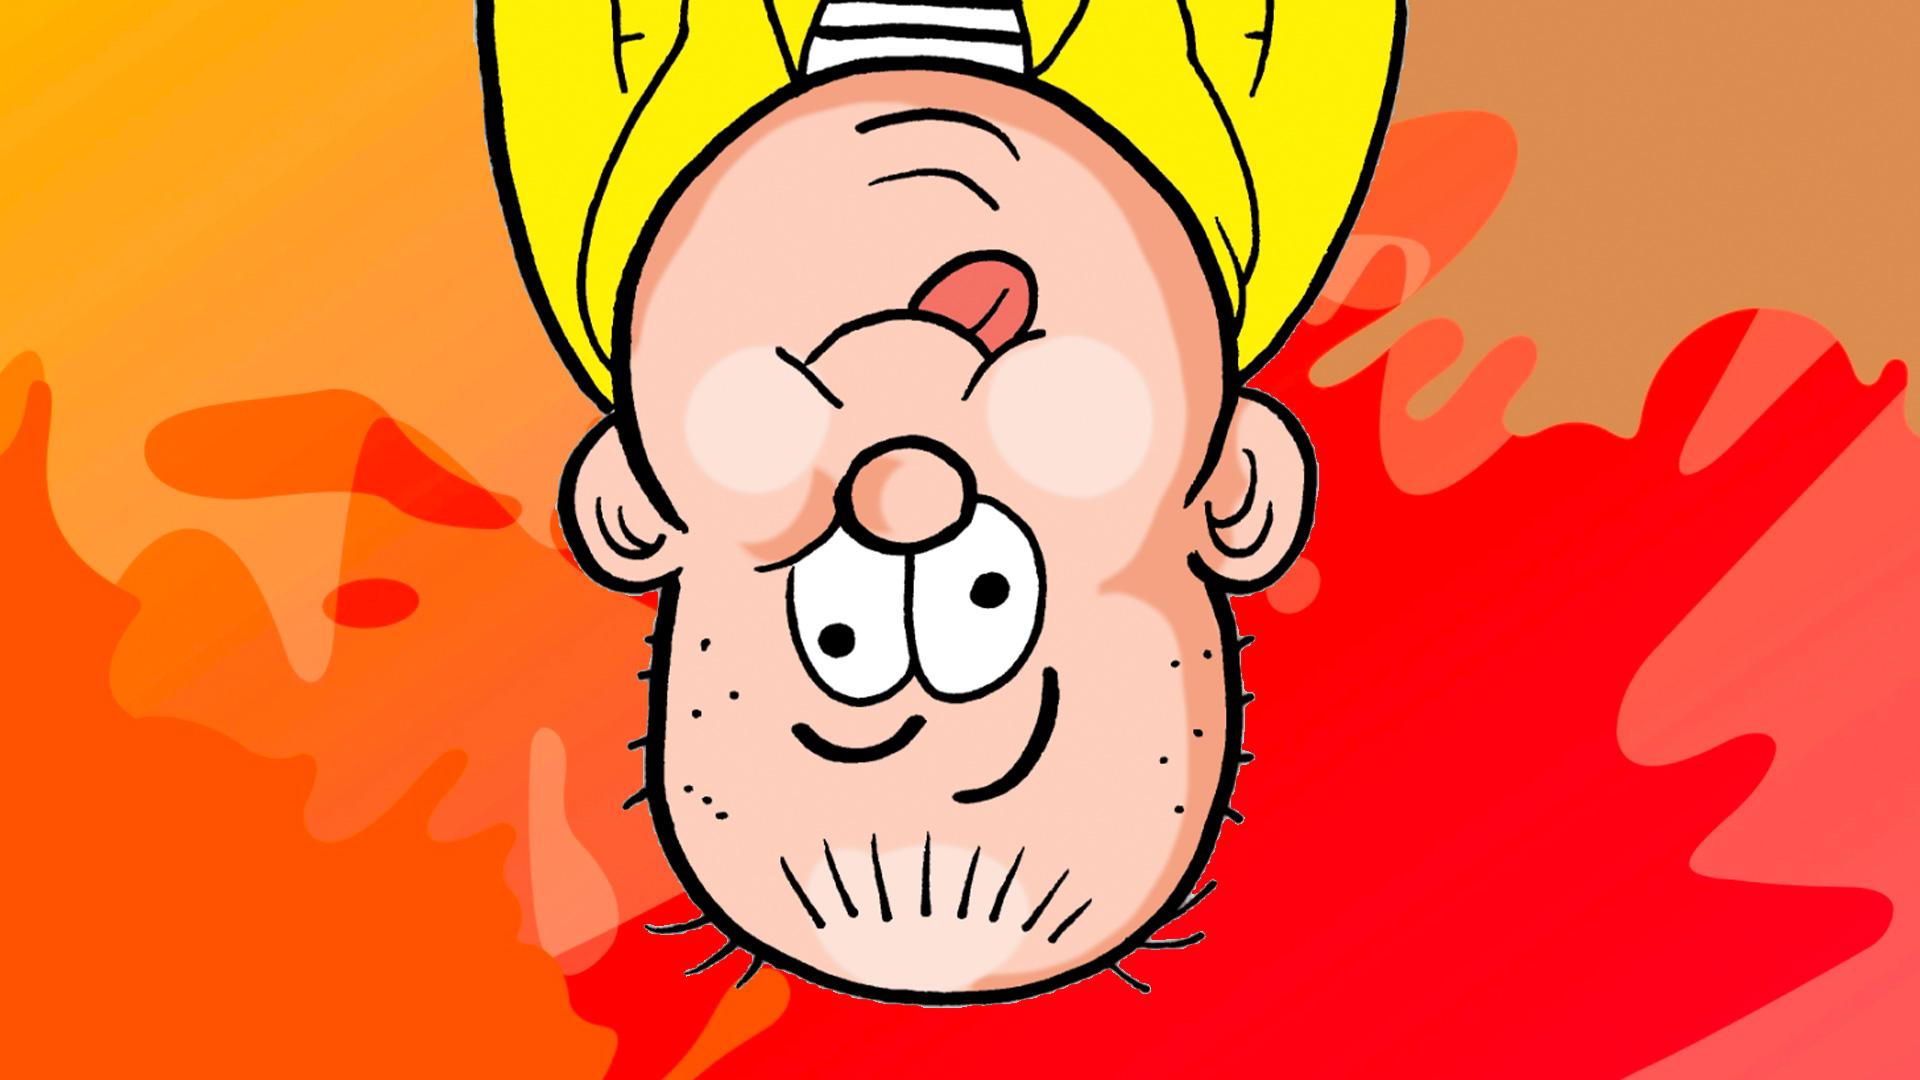 Smiffy from the Bash Street Kids